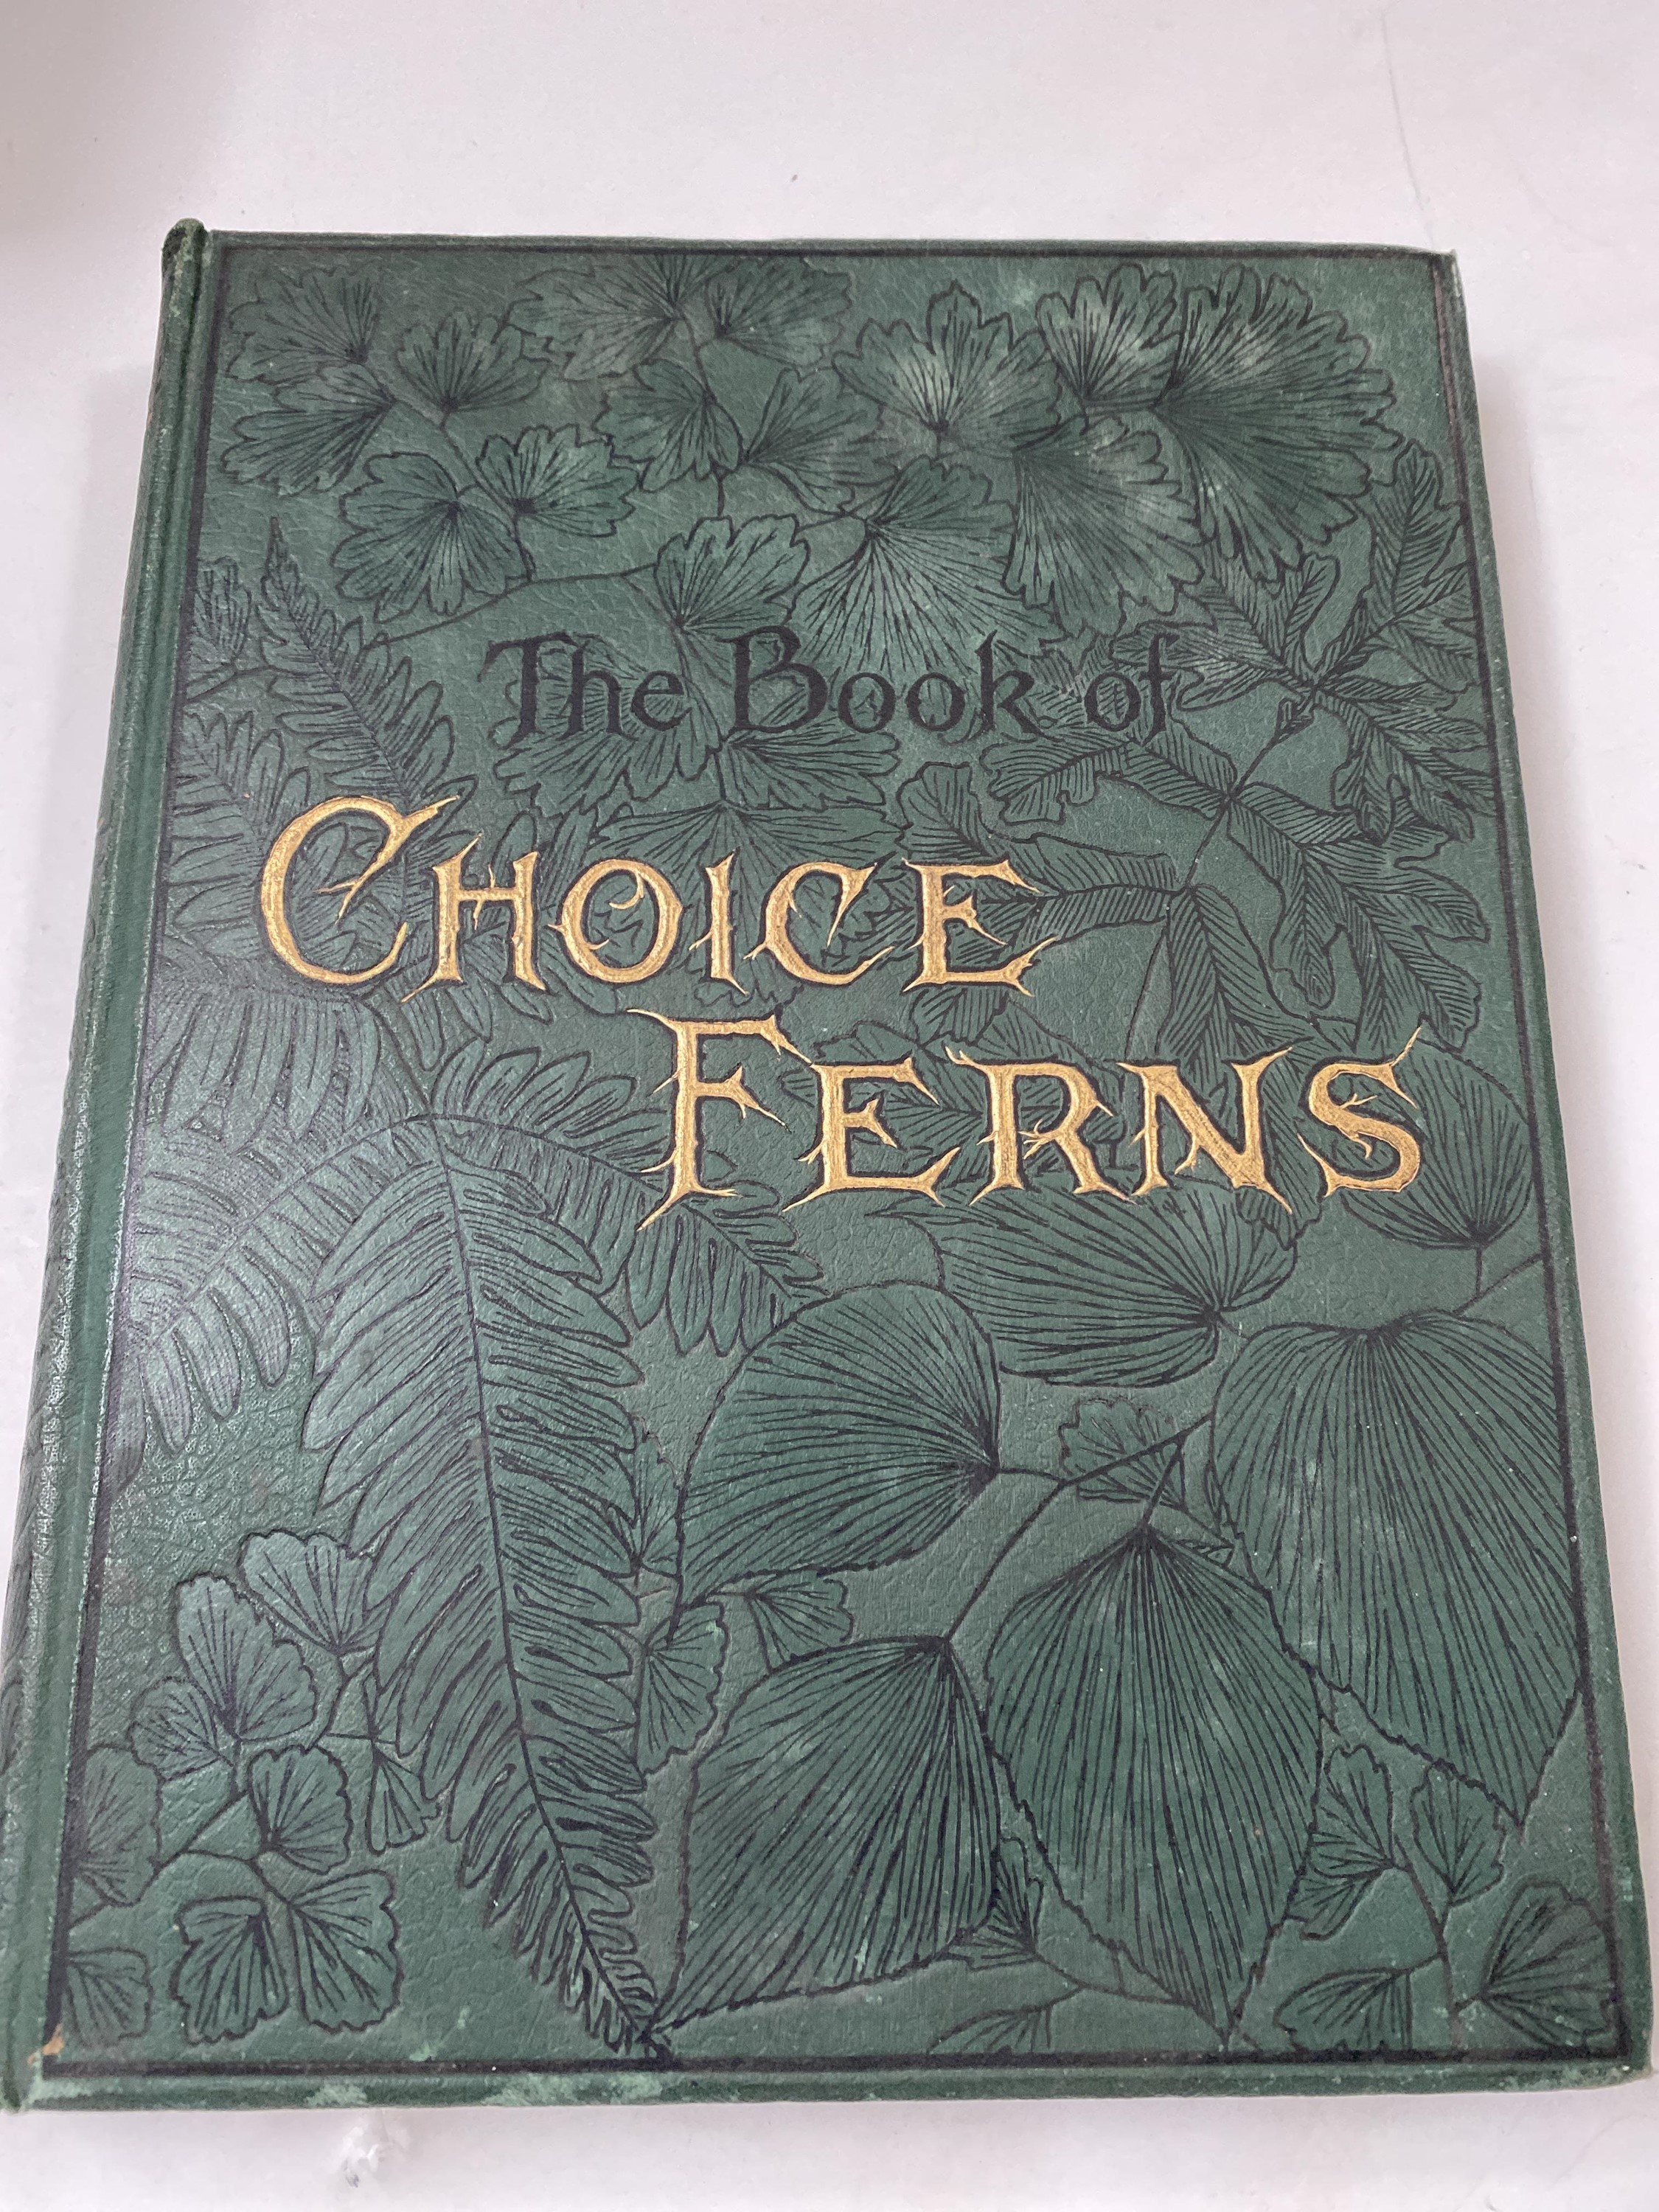 GEORGE SCHNEIDER. 'The Book of Choice Ferns.' Five vols, original pictorial cloth, rubbed ends to - Image 2 of 6